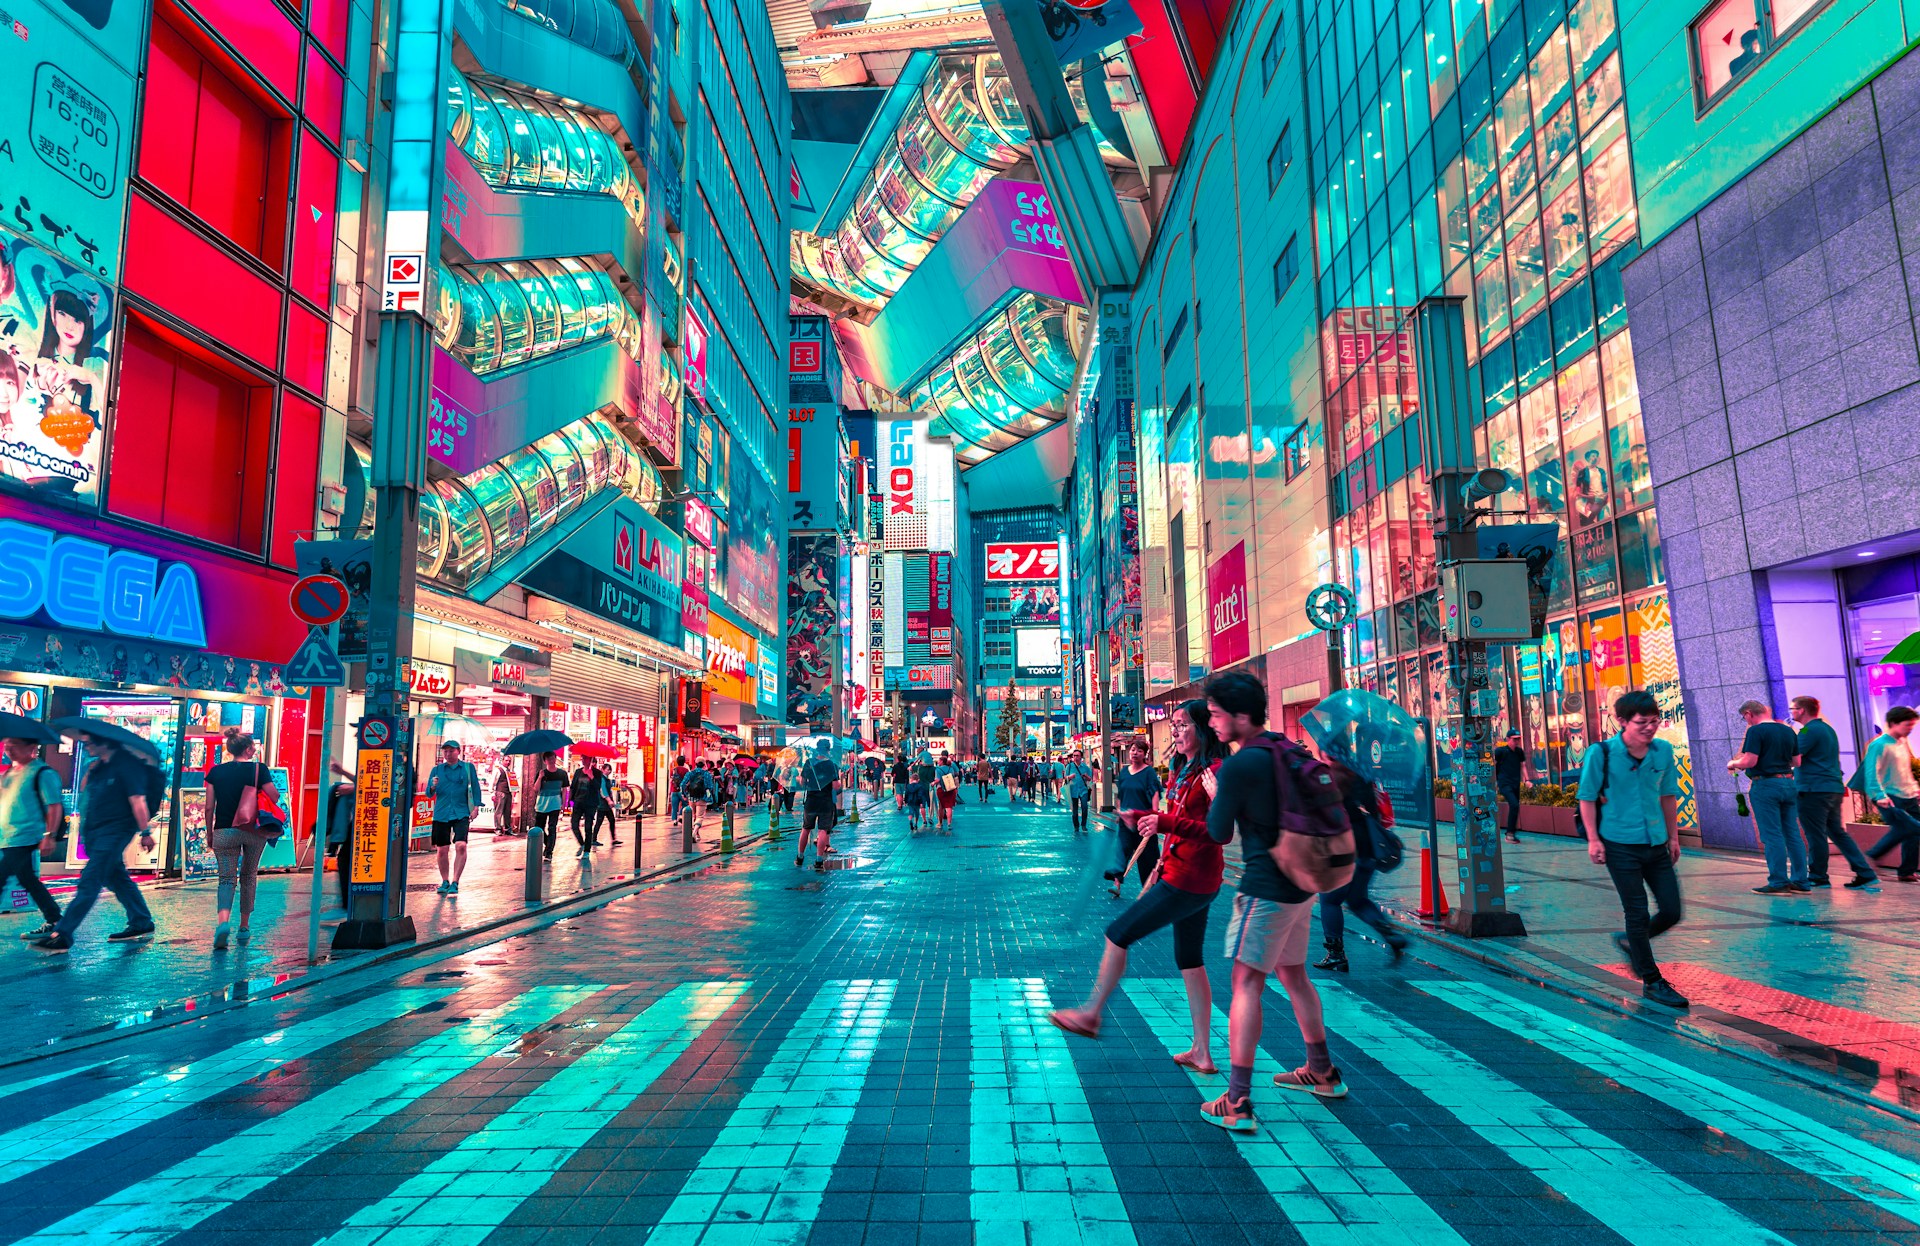 The streets of Tokyo, Japan